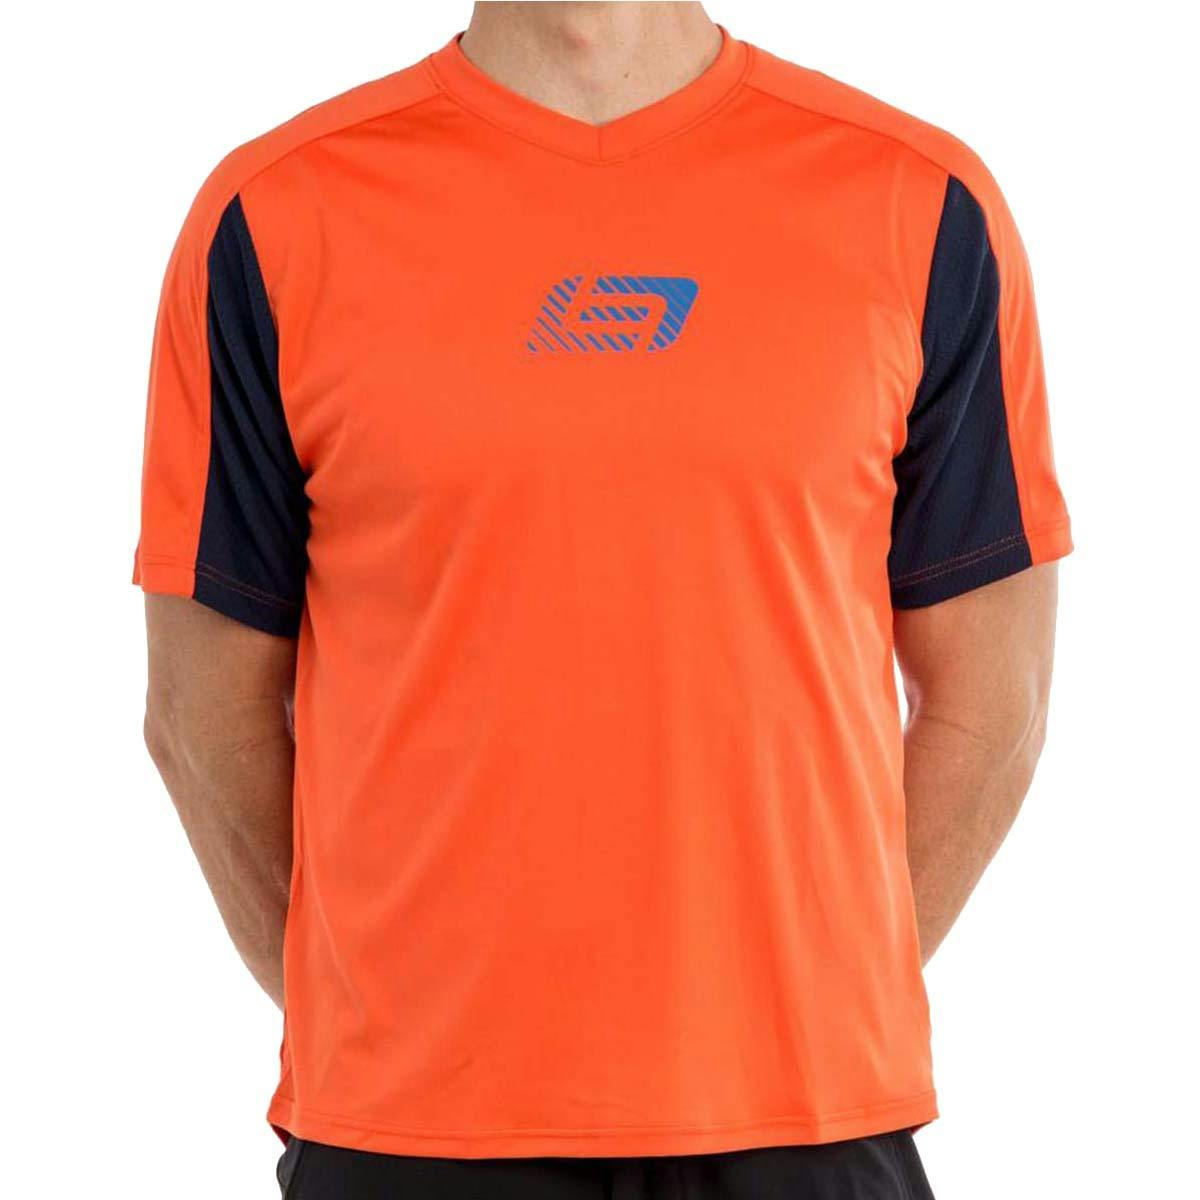 Bellwether Apex Men's Cycling Jersey - Orange - Small